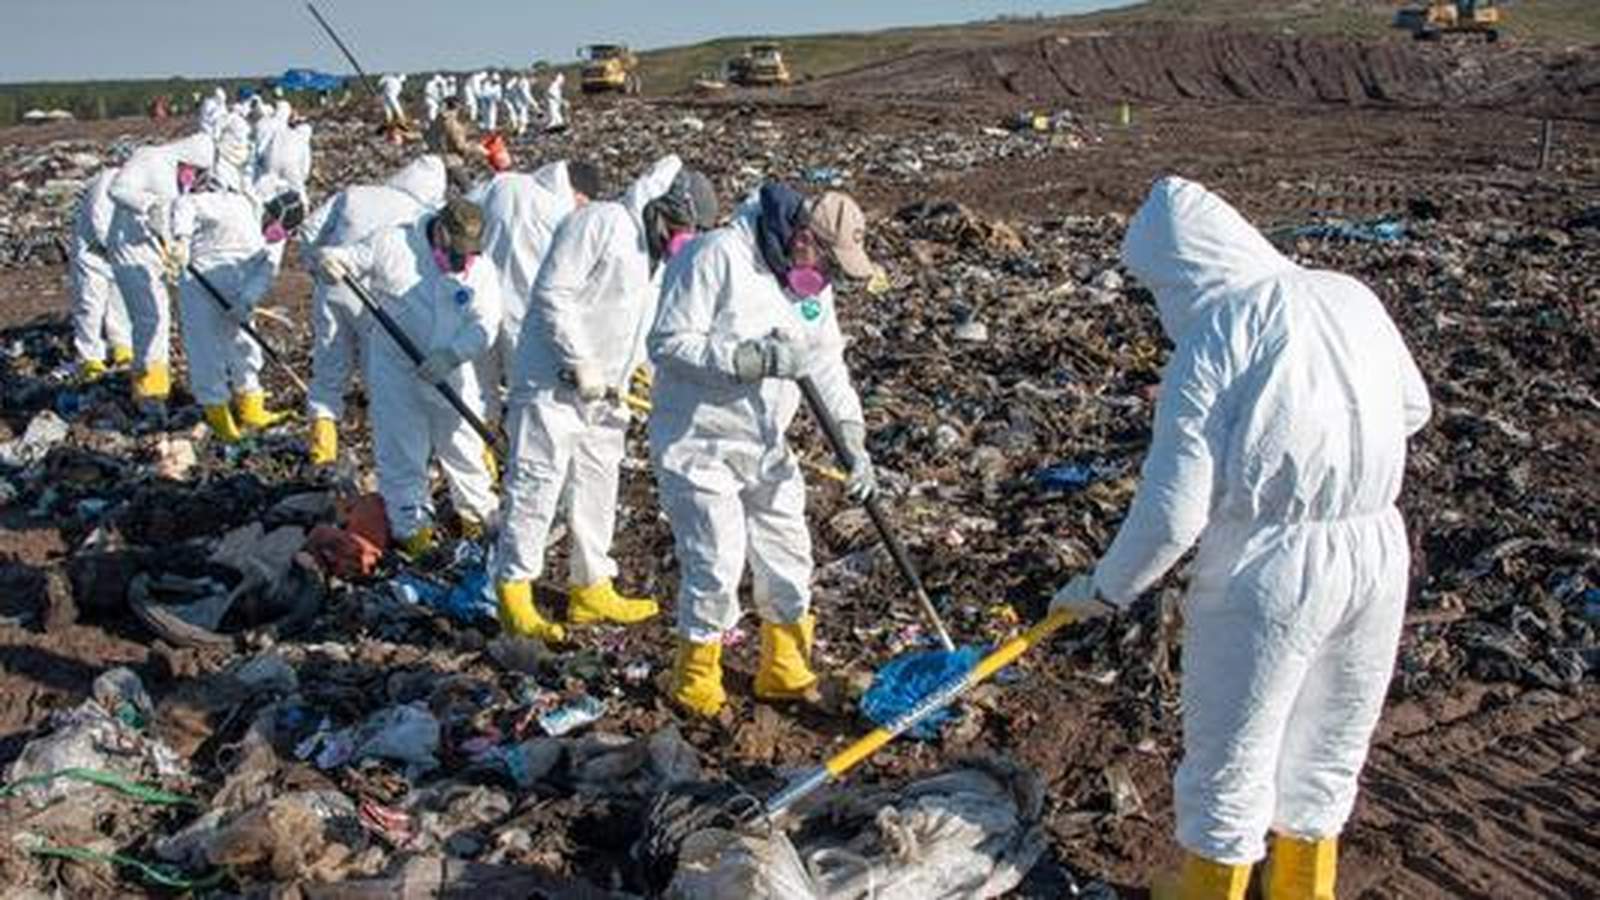 Landfill search usually ‘last resort,’ forensic expert says